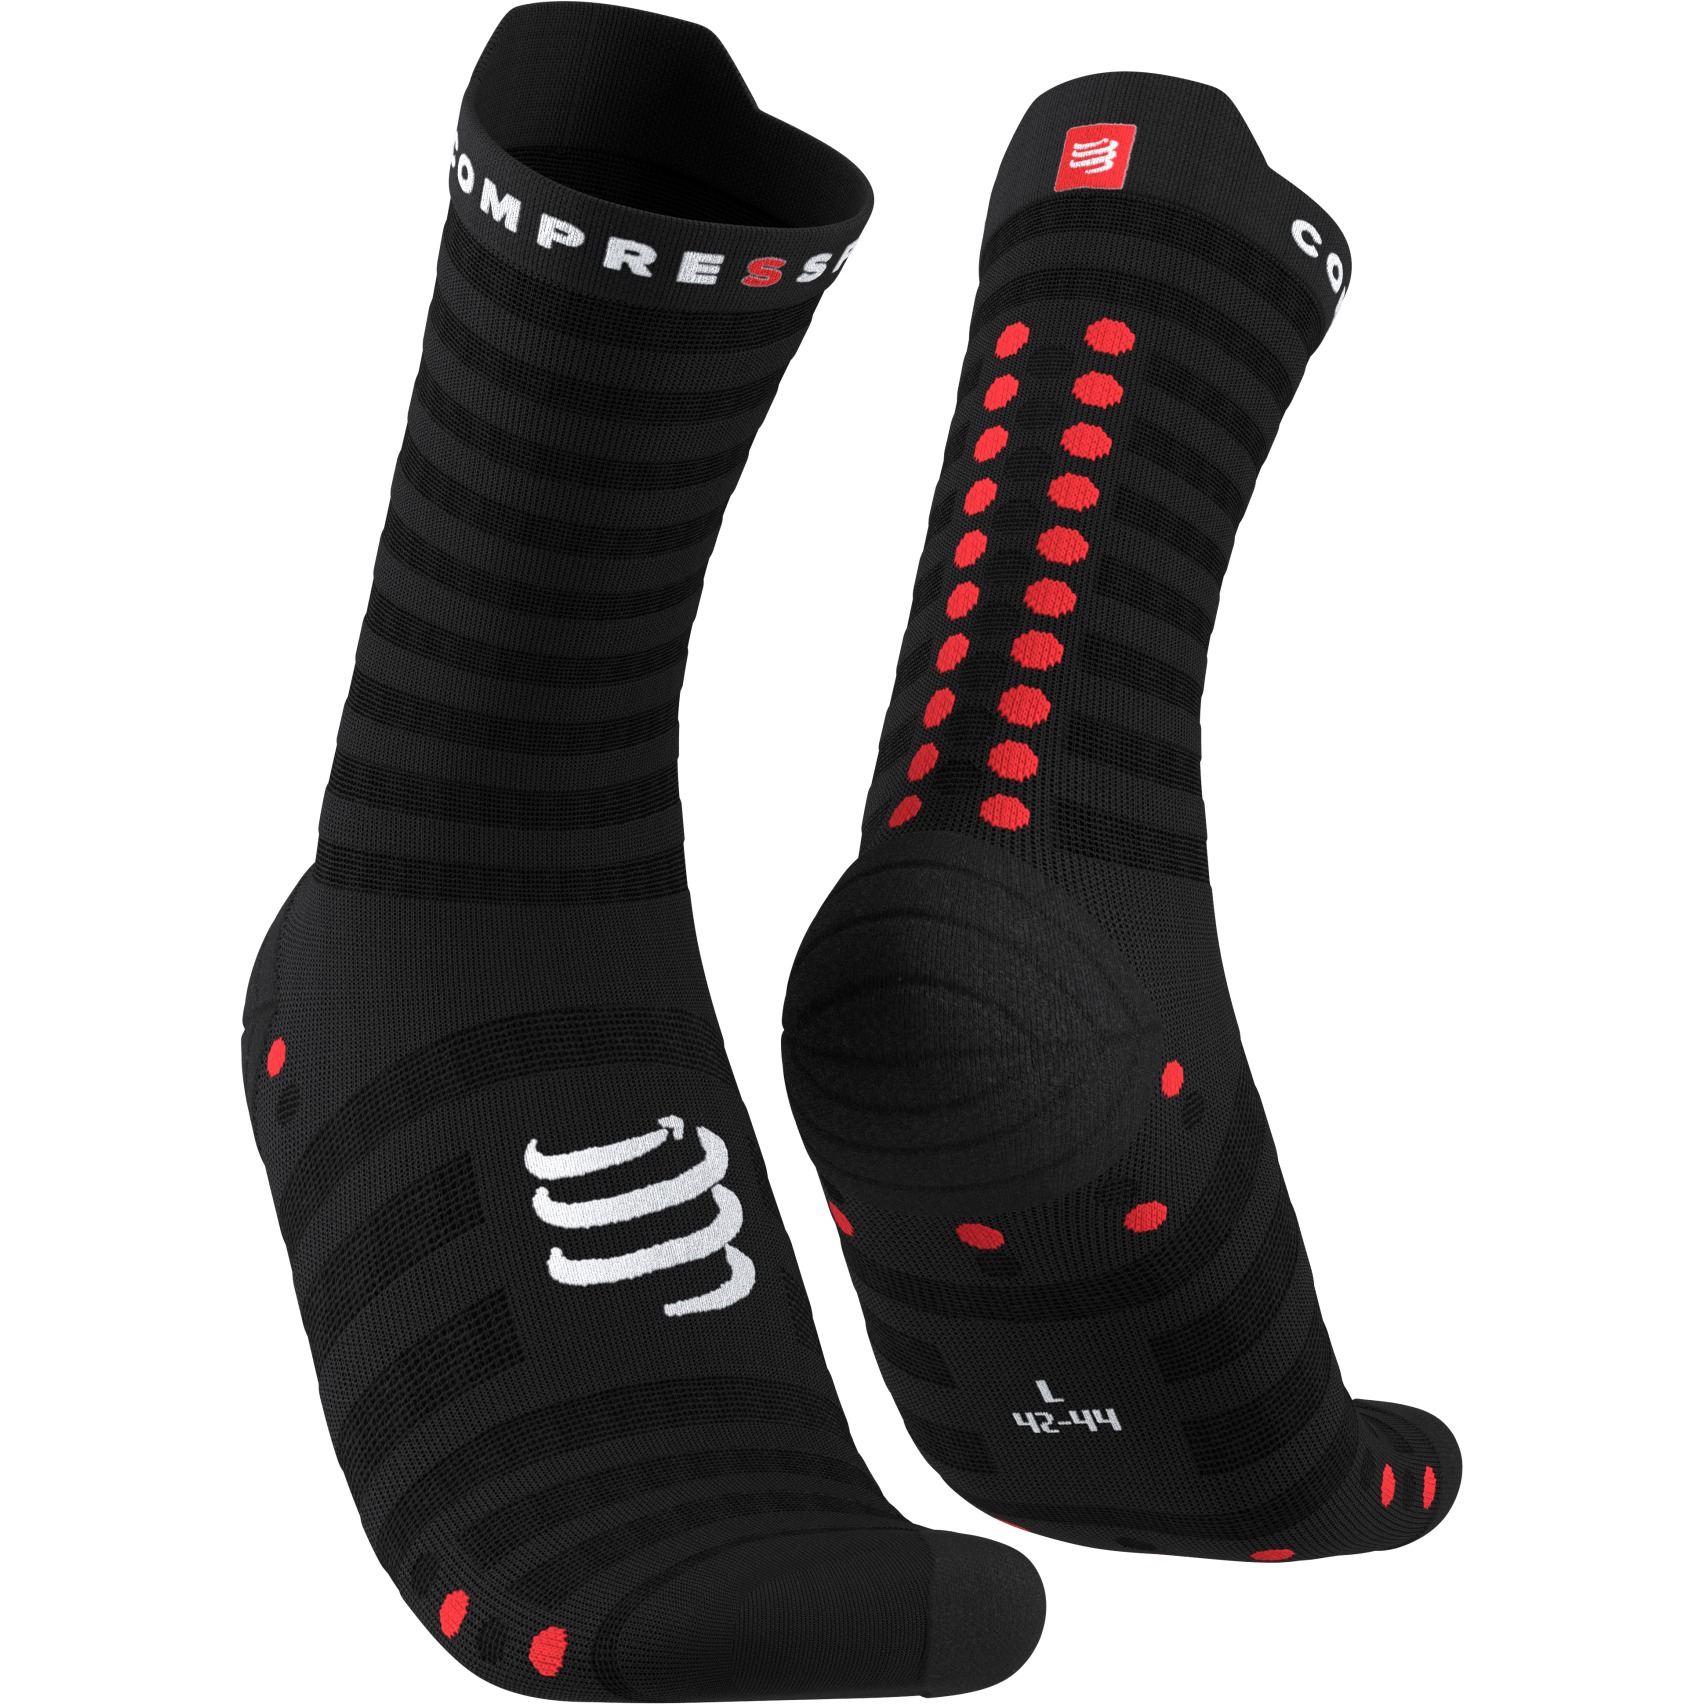 Picture of Compressport Pro Racing Compression Socks v4.0 Ultralight Run High - black/red